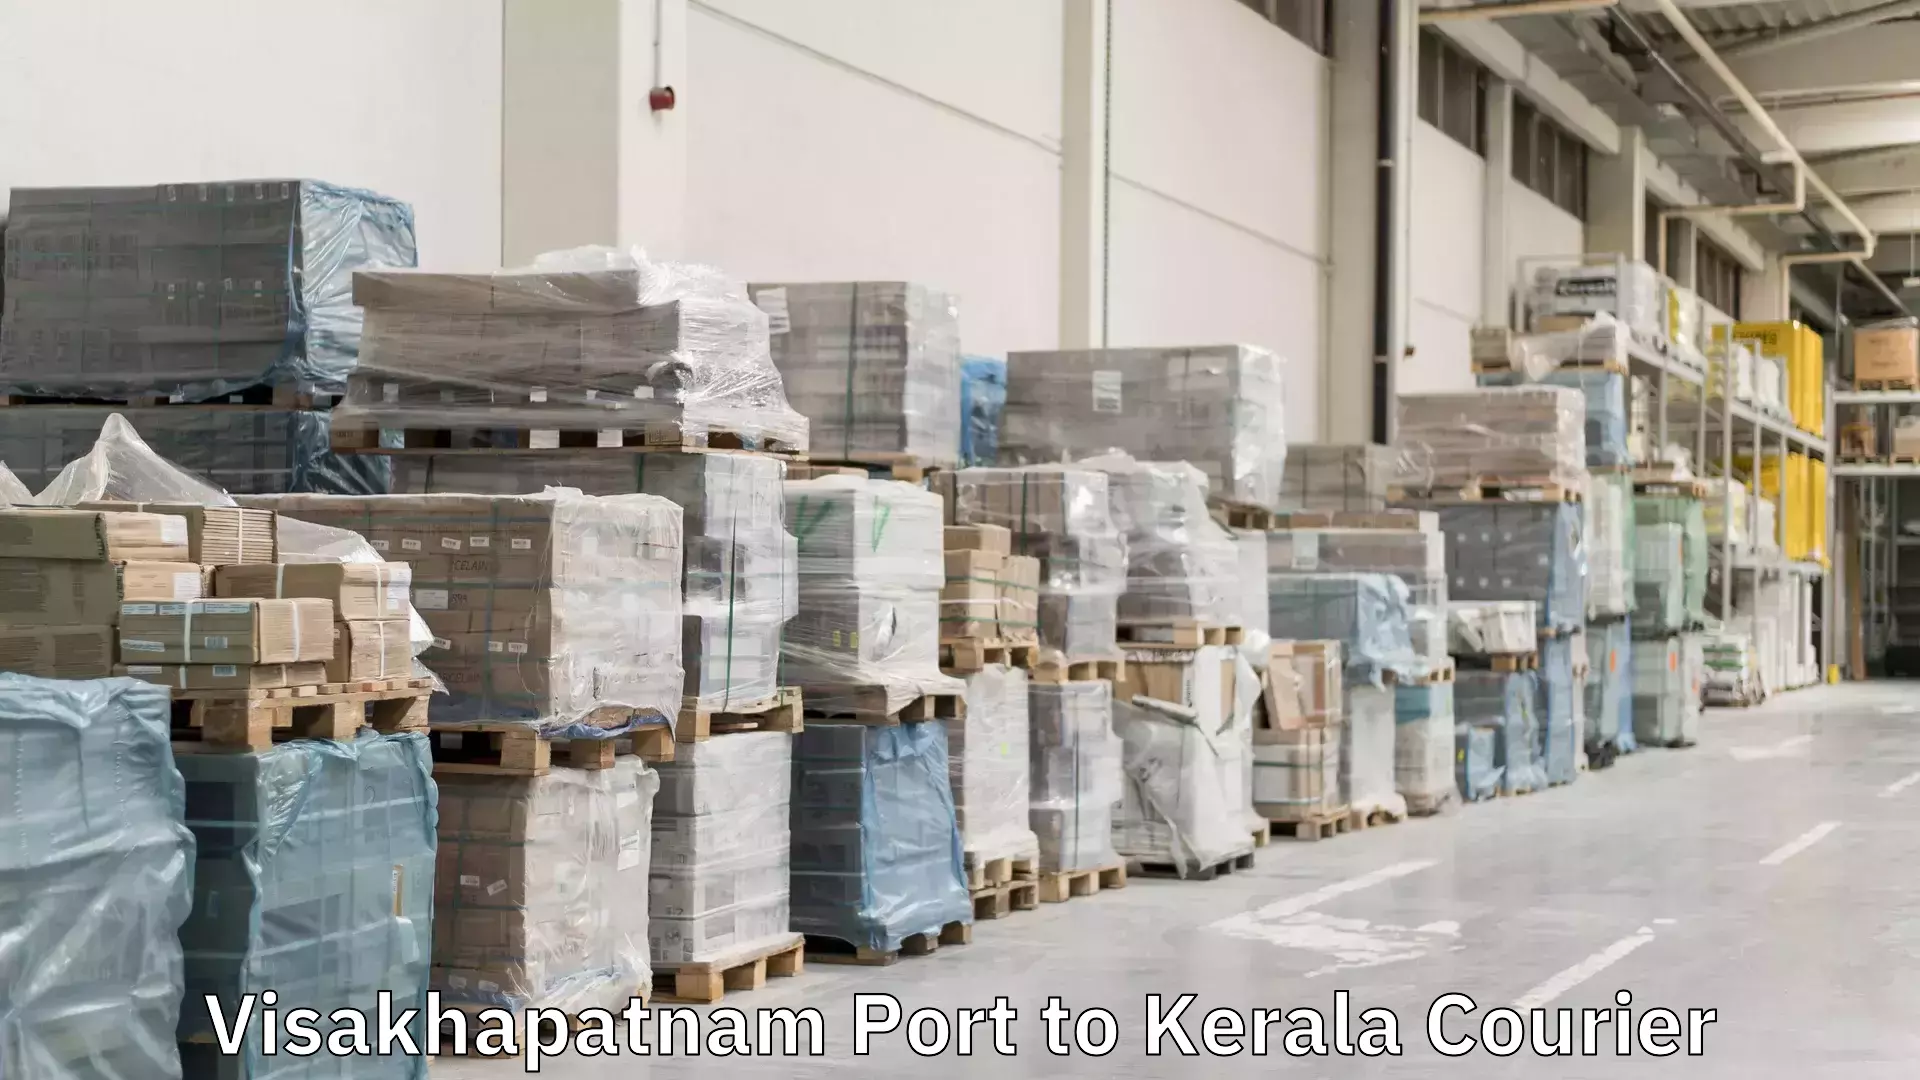 Express mail solutions Visakhapatnam Port to Kerala